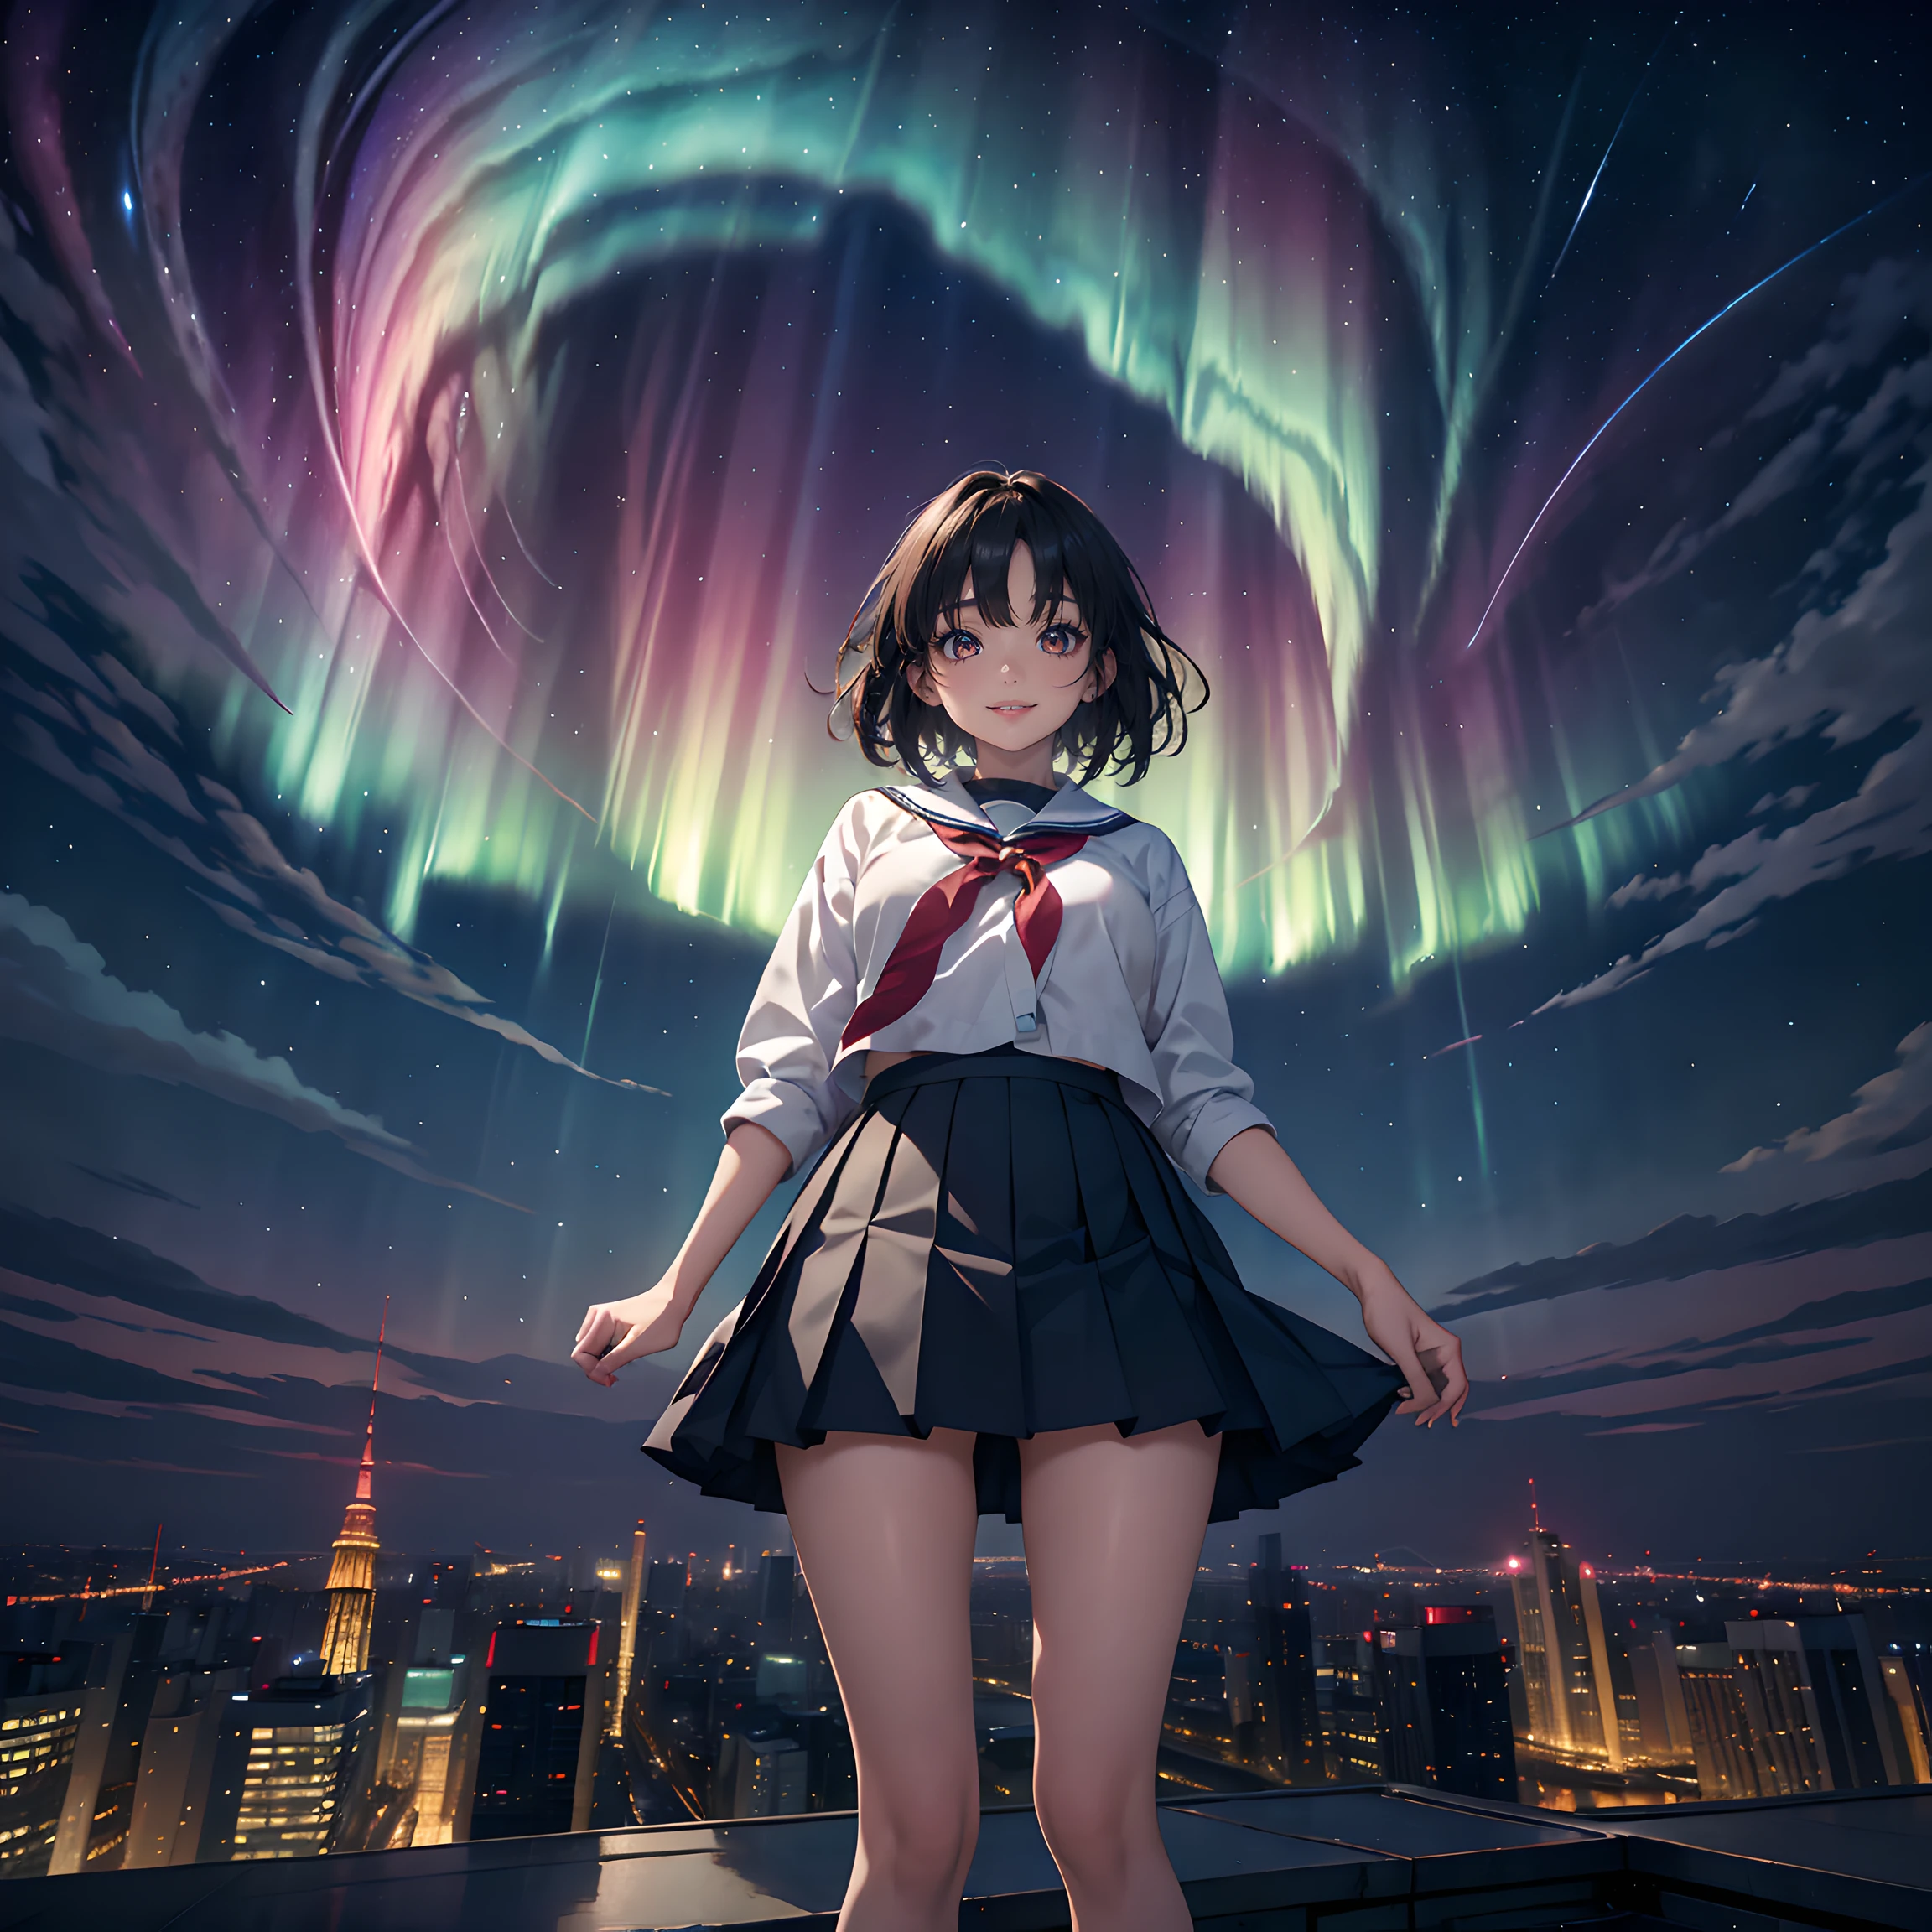 Composition: "Compose an image set in the heart of Tokyo city, where the vibrant and colorful Aurora Borealis lights up the urban skyline. The composition should capture the fusion of city lights and the ethereal beauty of the Aurora."

Person: "In the foreground, feature a young Japanese high school girl who is also a K-POP idol. She stands in awe, gazing up at the mesmerizing Aurora with a sense of wonder and admiration. She has short hair, no glasses, and is dressed in the iconic Japanese sailor ."

Background: "Set the scene in Tokyo city center, with its skyscrapers and bustling streets providing a modern backdrop to the celestial phenomenon above. The night sky is filled with the vivid hues of the Aurora Borealis, creating a unique and enchanting atmosphere that blends the urban and natural worlds."